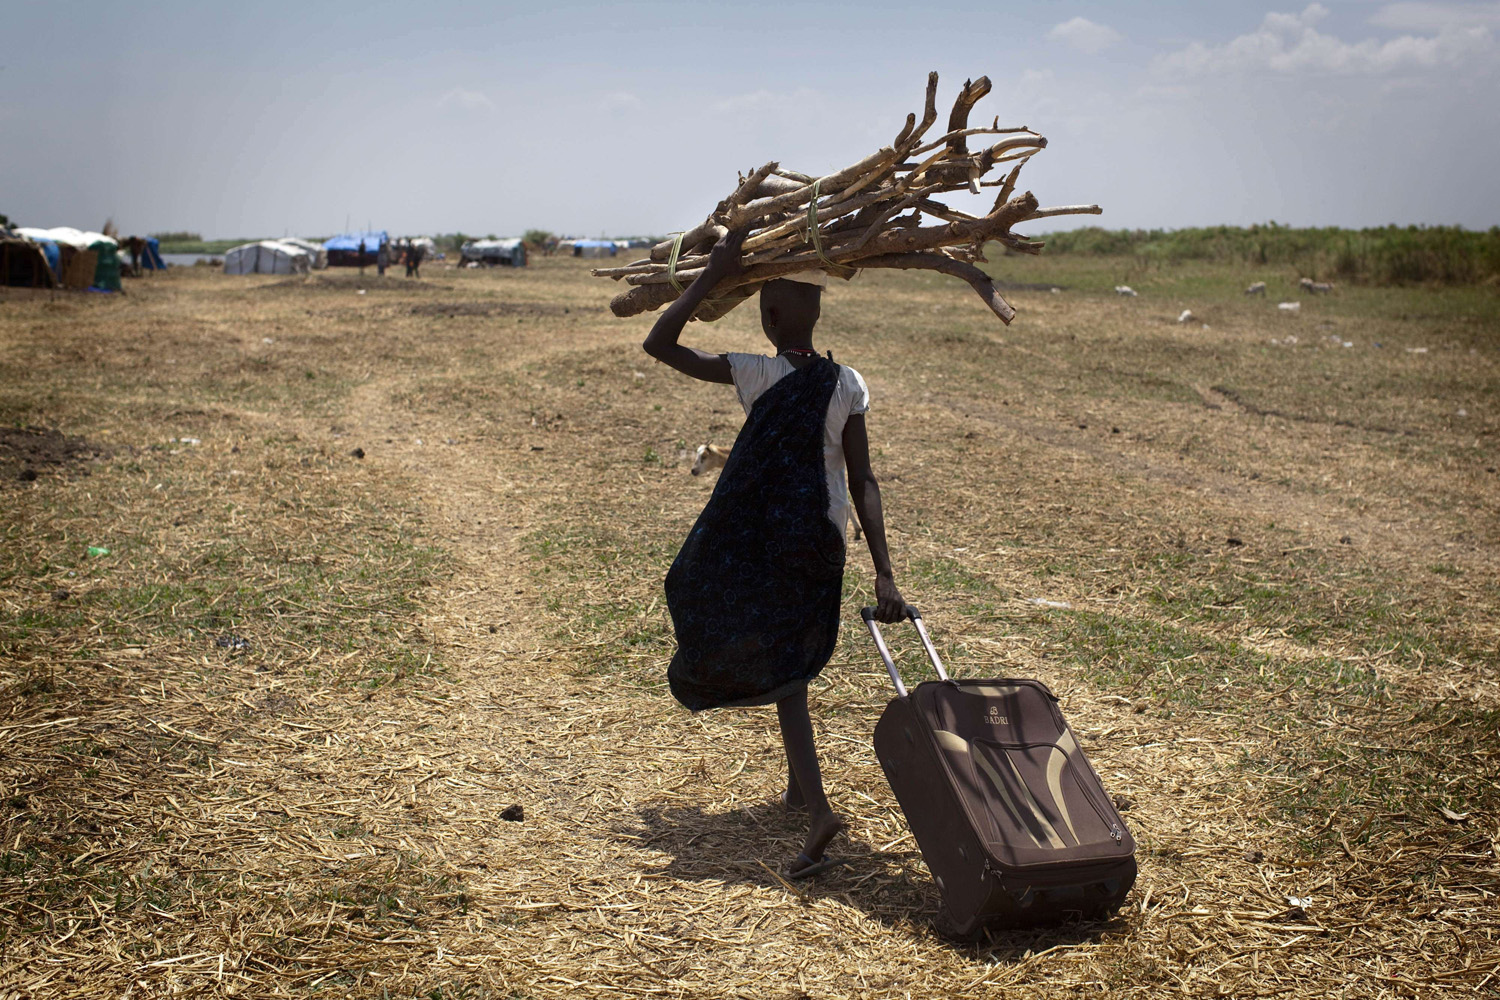 Mar. 5, 2014. A South Sudanese woman walks with wood to reinforce her house in an isolated makeshift IDP camp for Dinka ethnic group placed in an island between Bor and Minkamman.